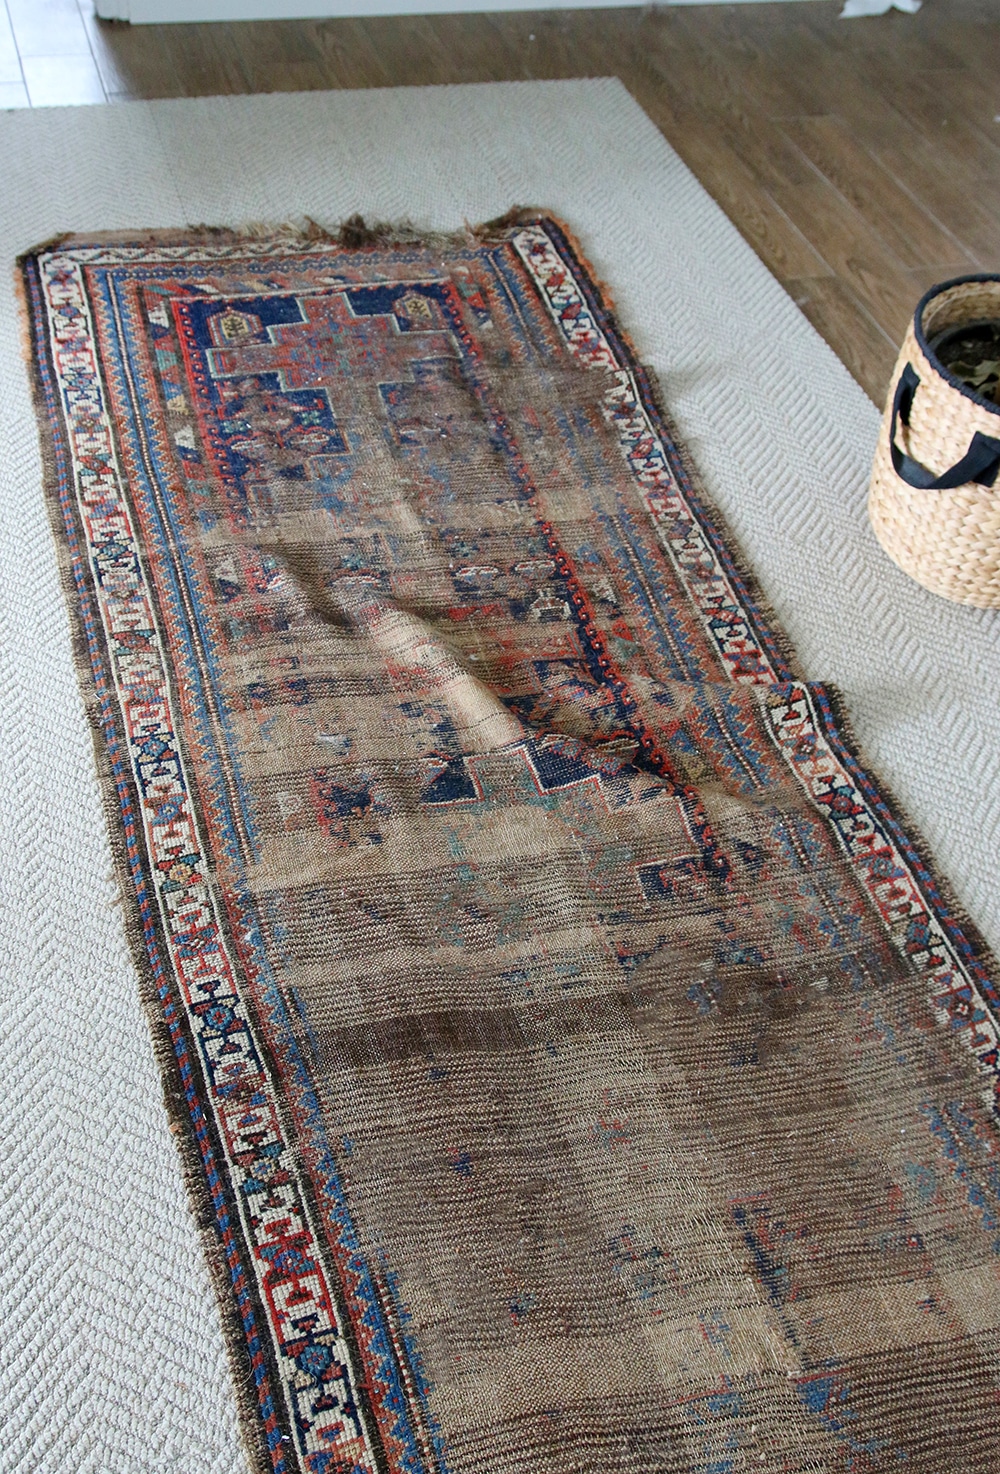 5 Tips For Keeping Area Rugs Exactly, How To Keep Rugs From Sliding On Carpet